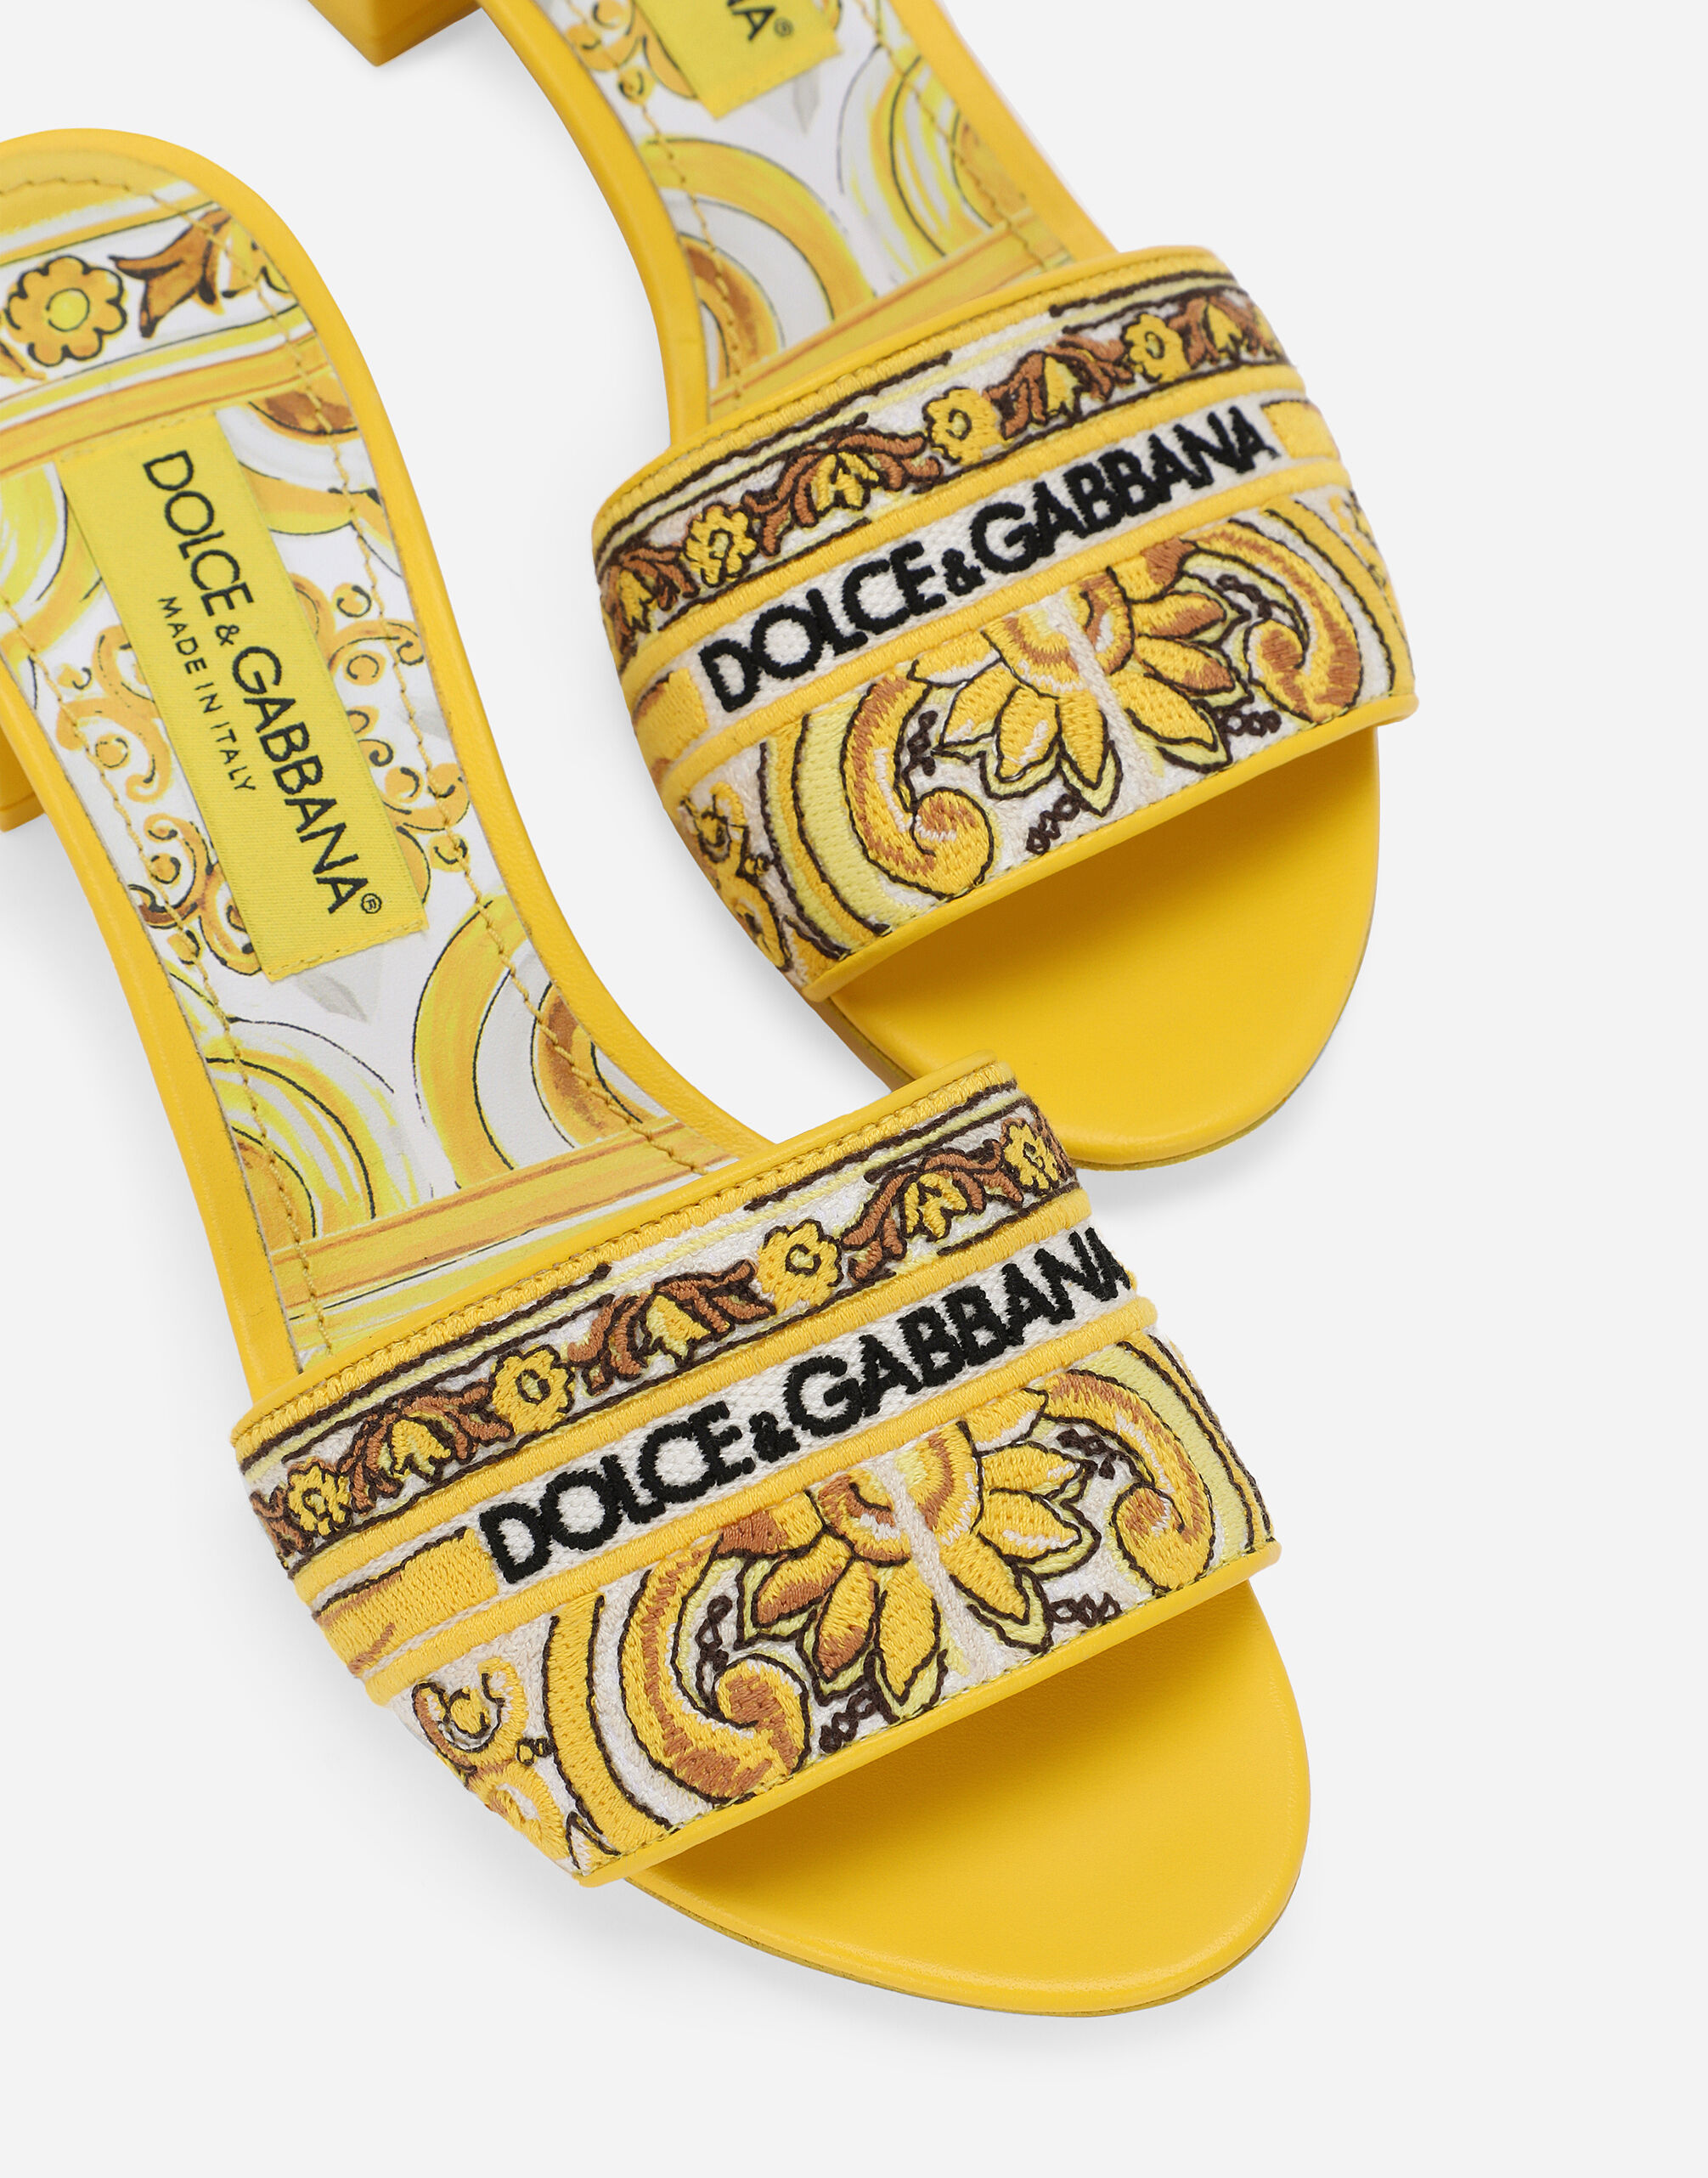 Mules with majolica embroidery in Print for | Dolceu0026Gabbana® US